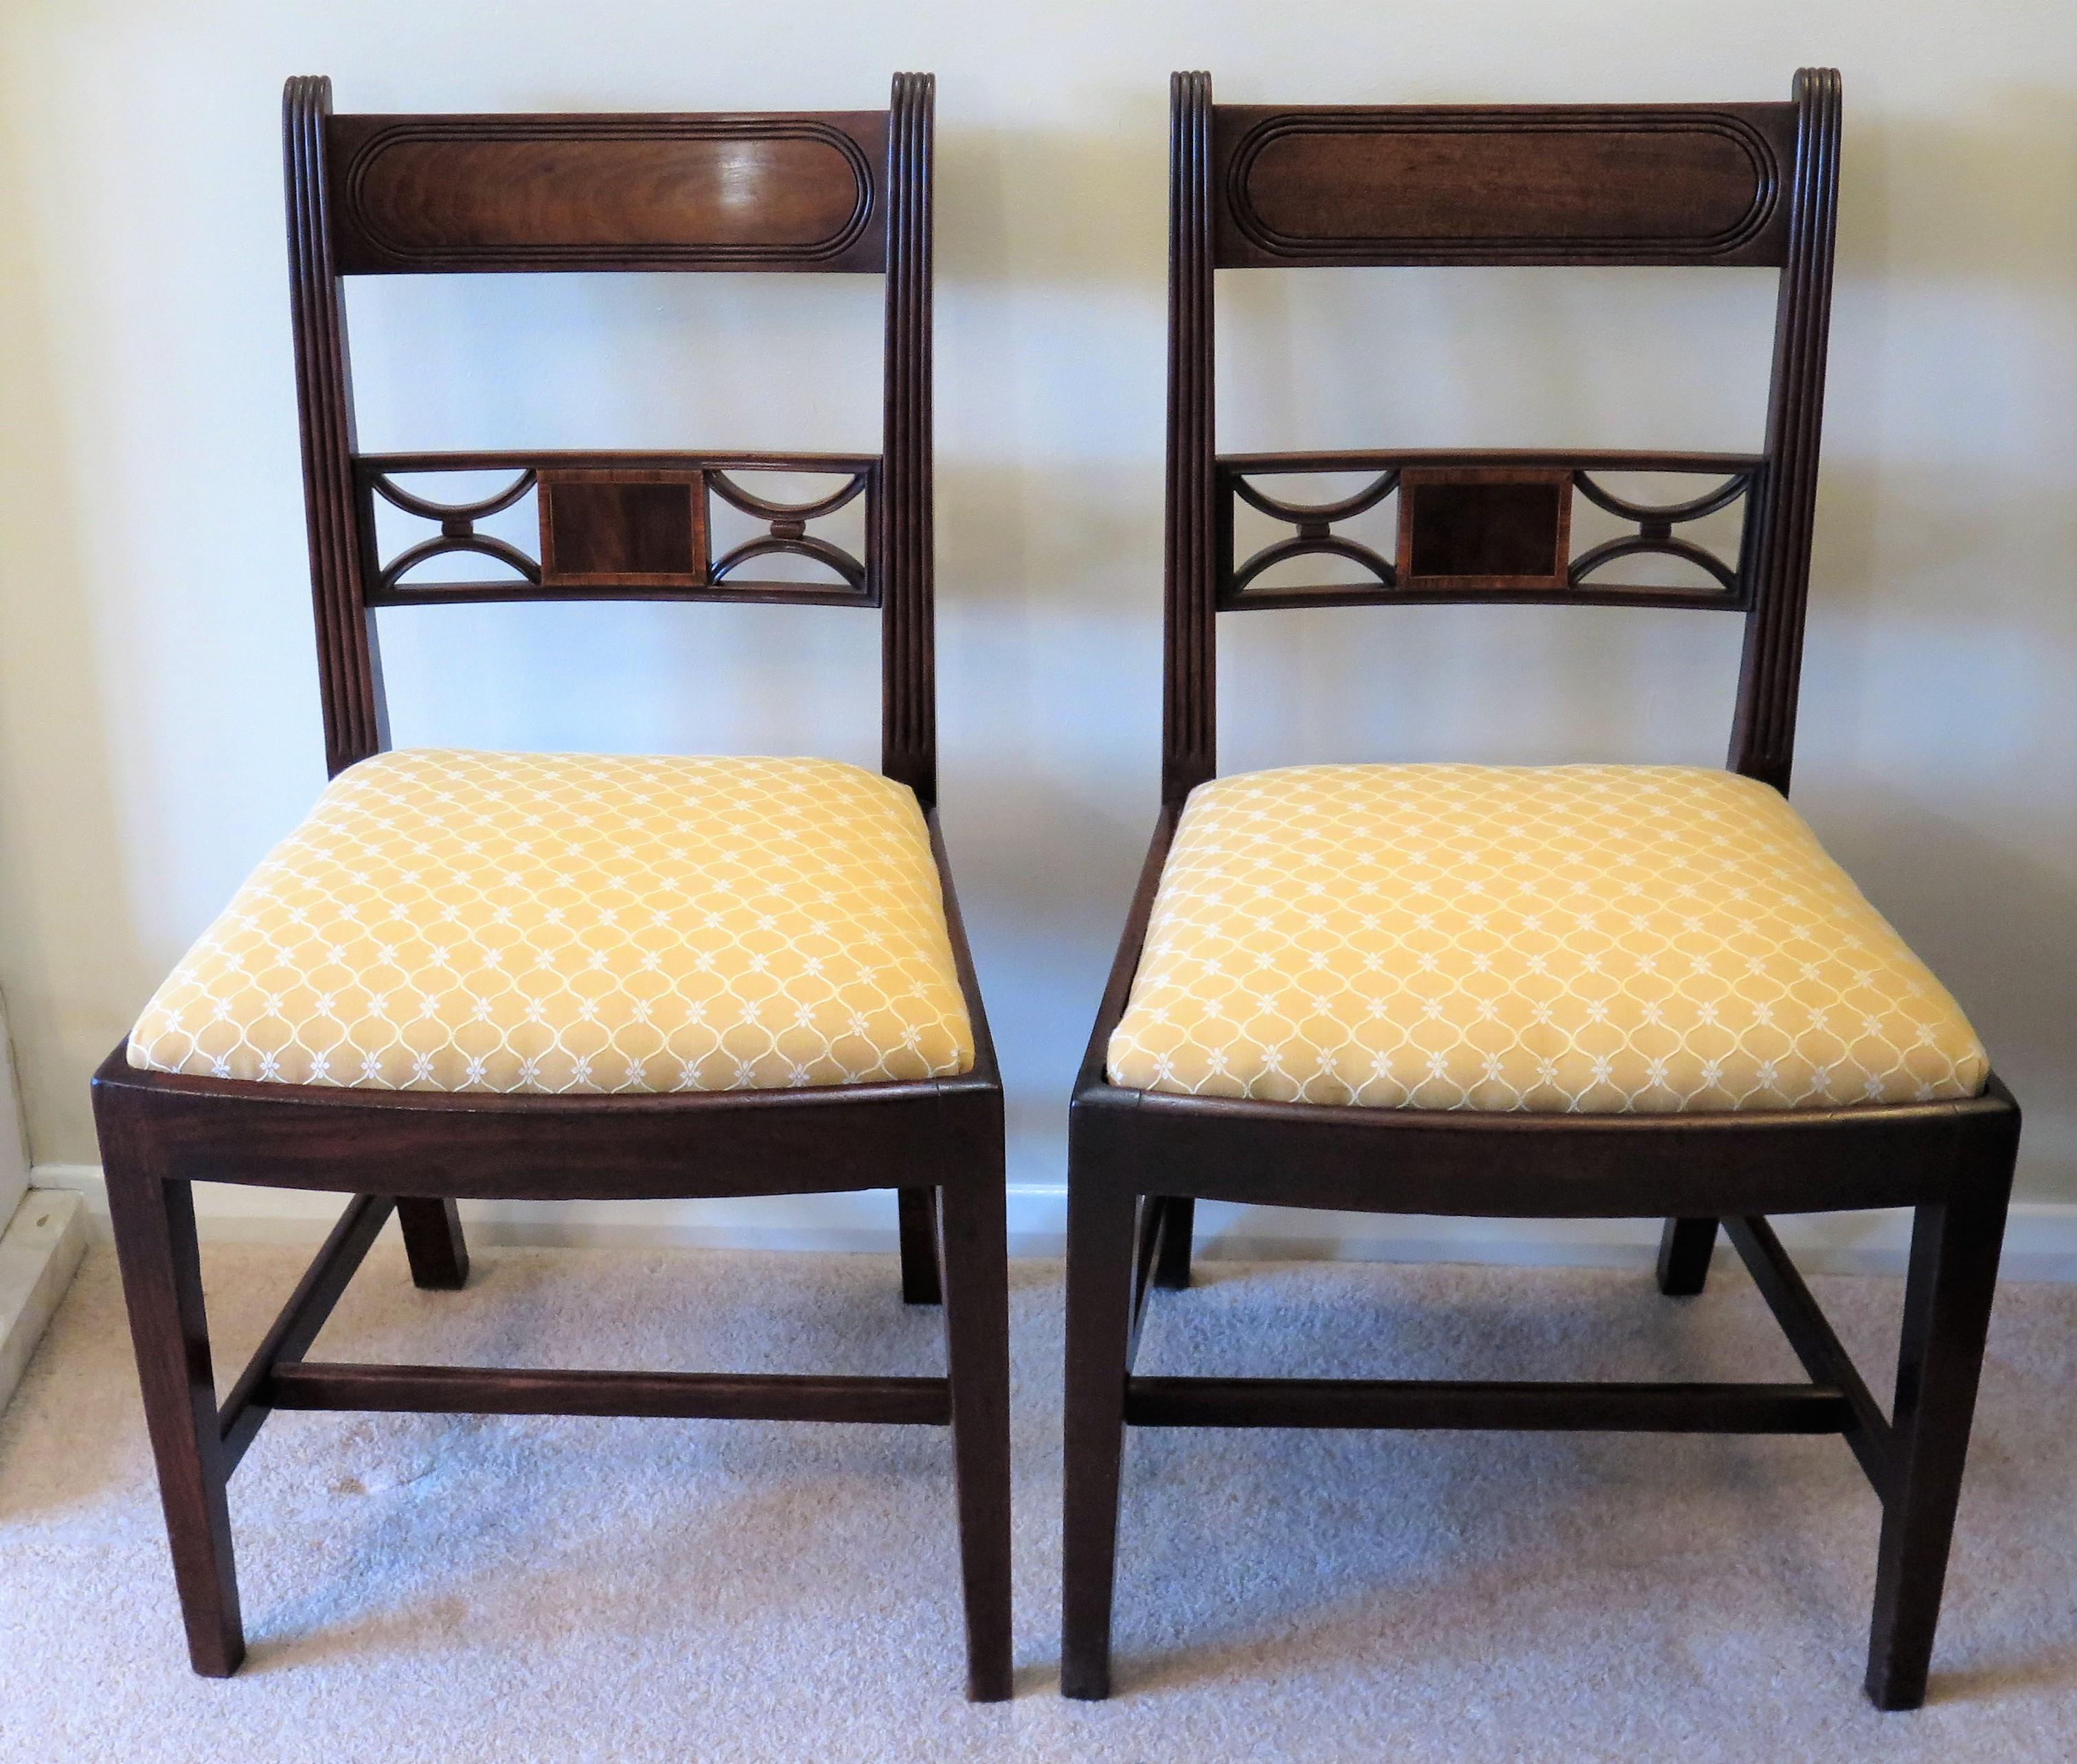 This a fine handmade pair of English, George 111rd, Sheraton period hardwood, possibly red walnut, dining or side chairs with good carved detail and reupholstered drop in seats, dating to the late 18th century, circa 1790.

The chairs have many